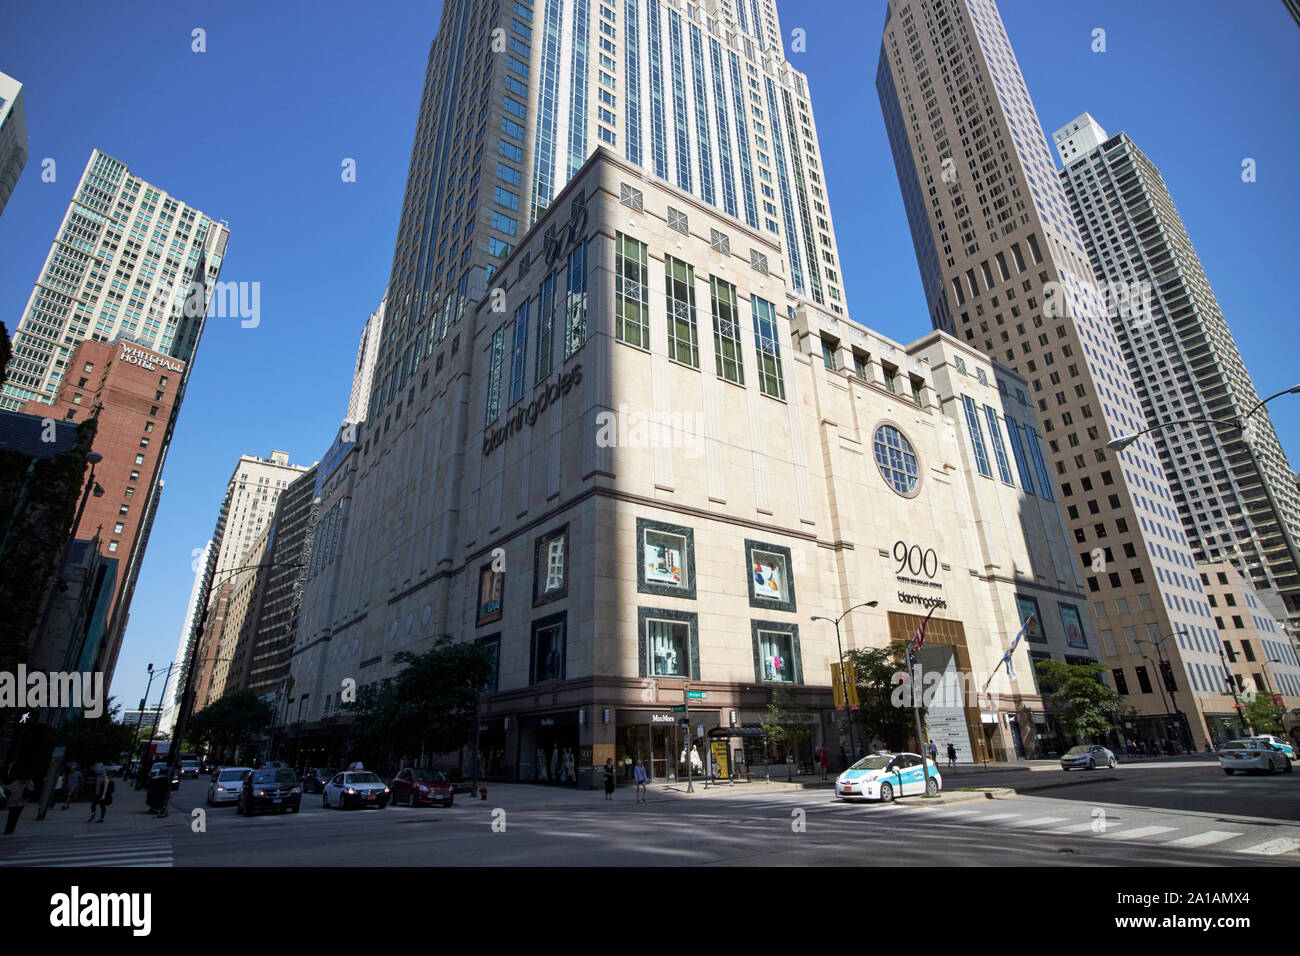 900 north michigan avenue bloomingdales store and four seasons hotel chicago illinois united states of america Stock Photo